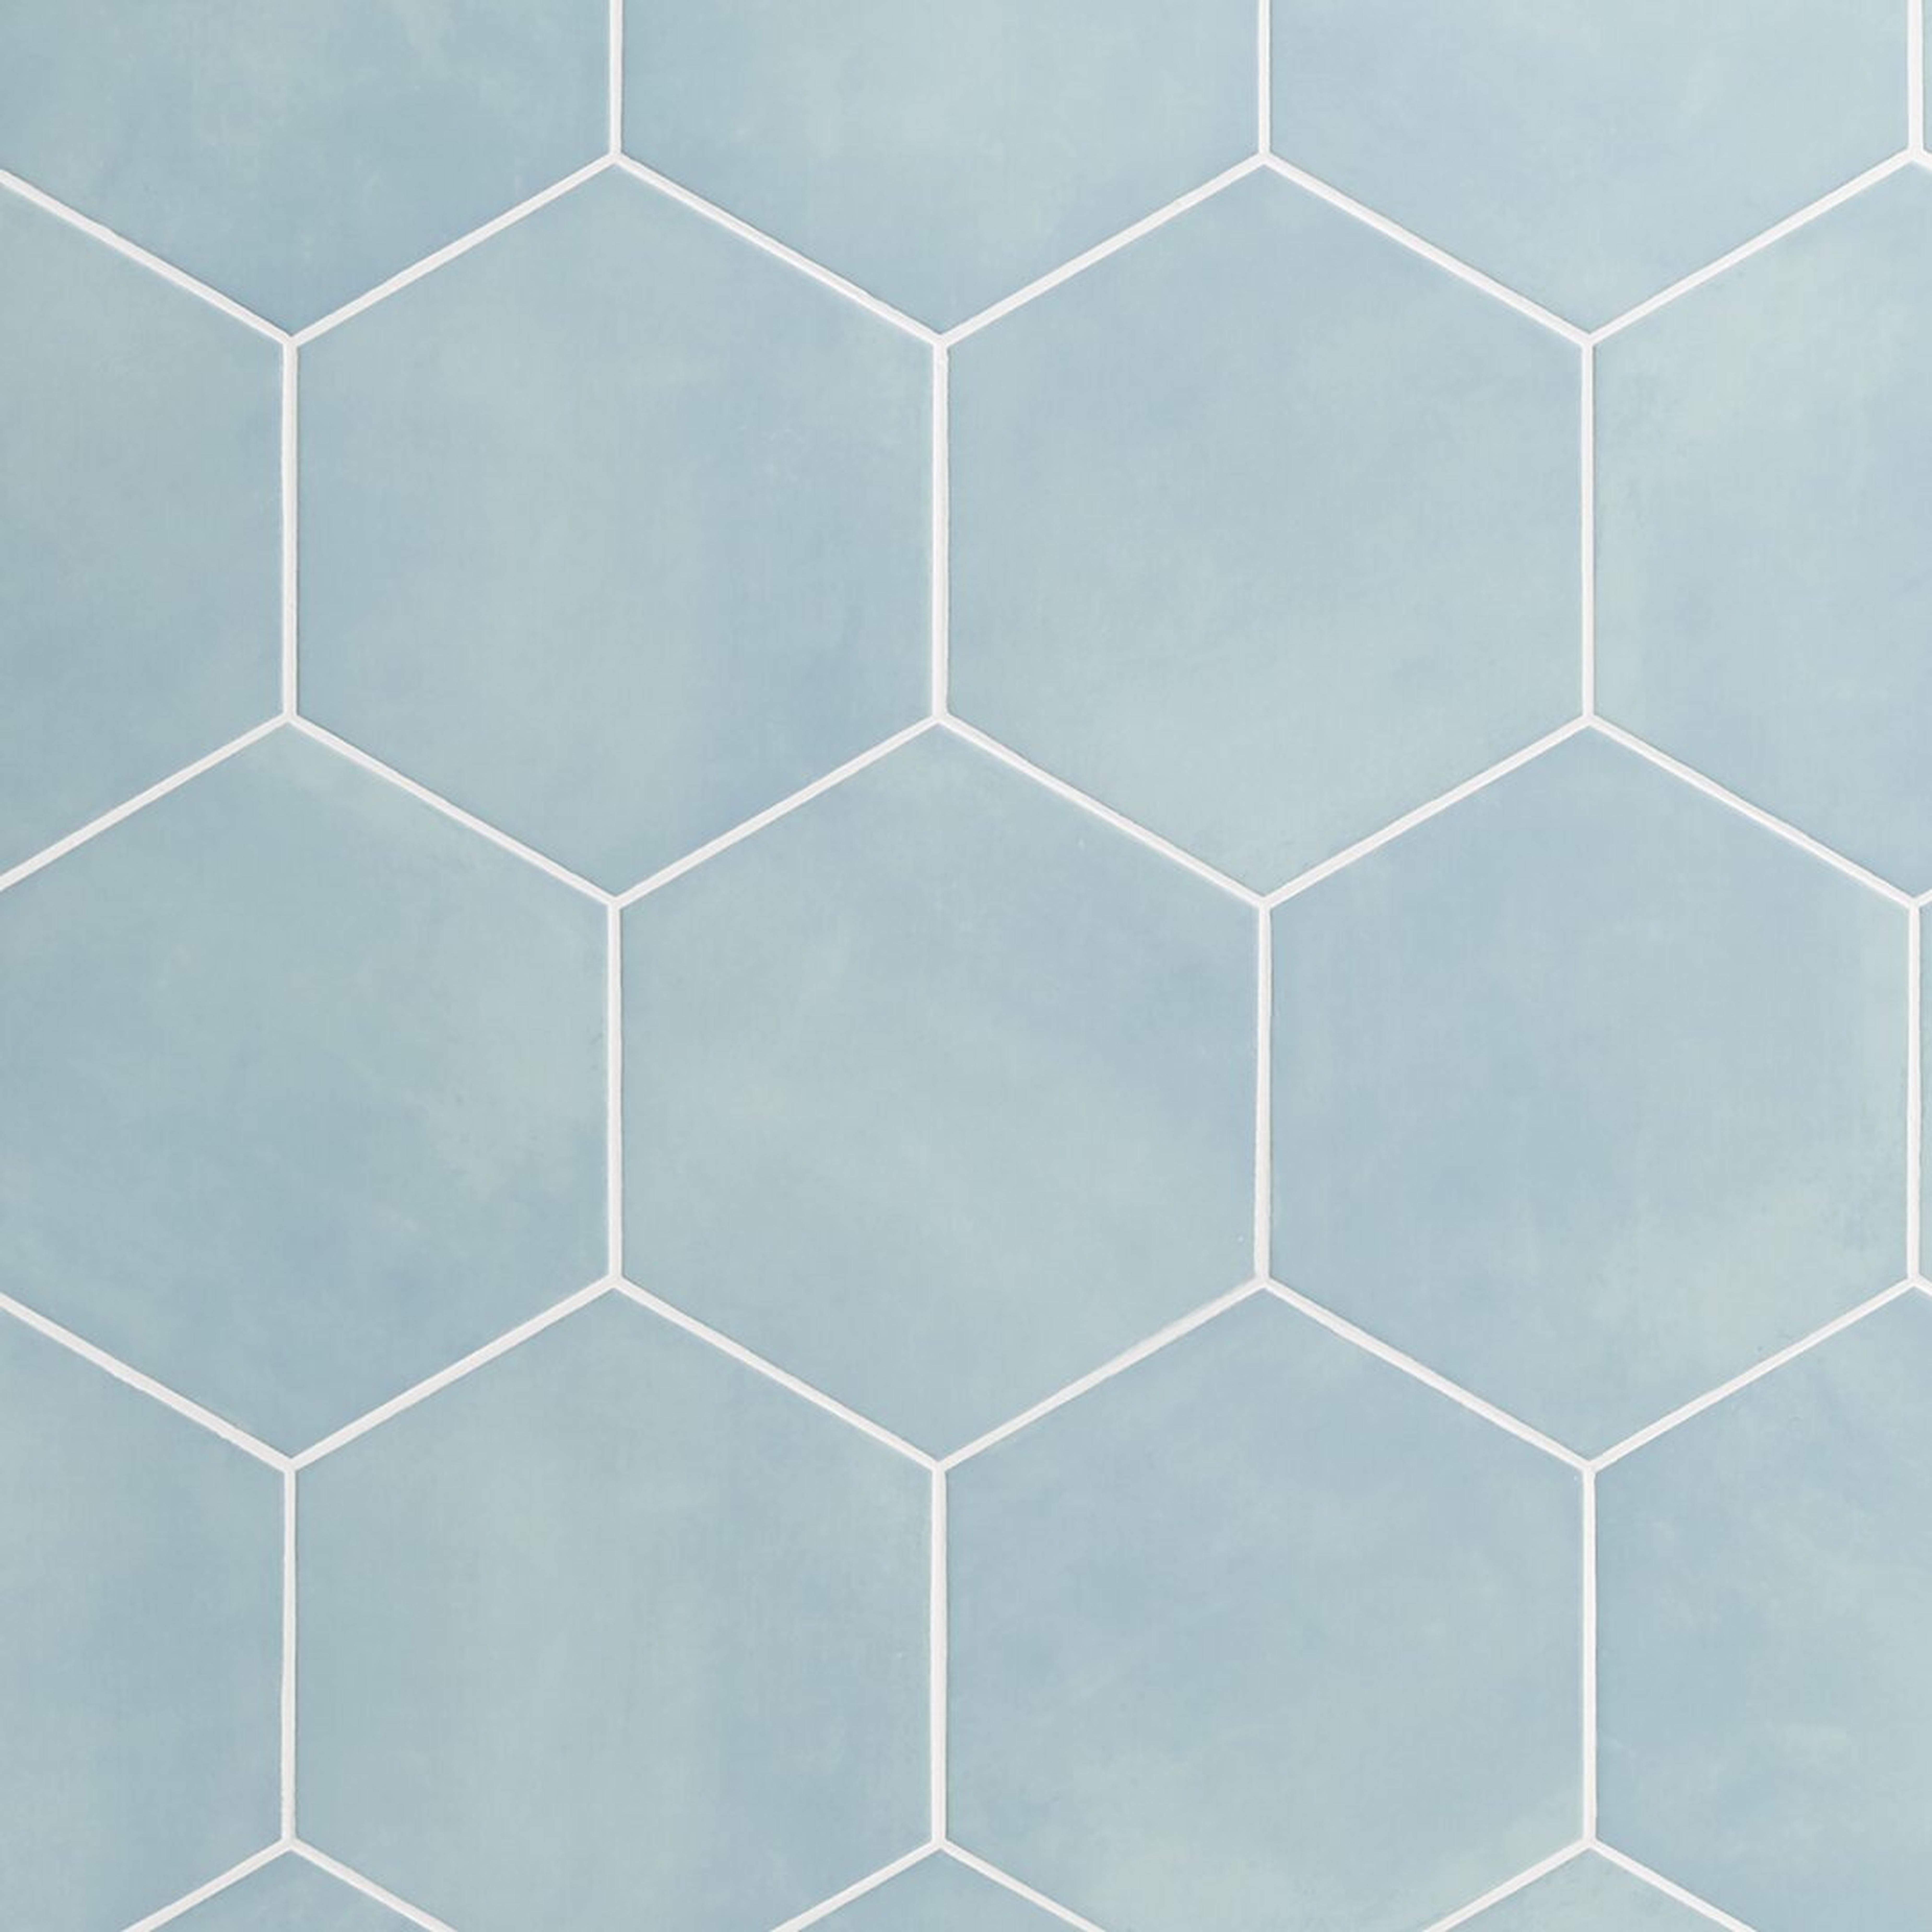 "Ivy Hill Tile Eclipse 8 In. Hexagon Floor And Wall Tile (16 Pieces, 6.03 Sq. Ft. / Case)" - Perigold